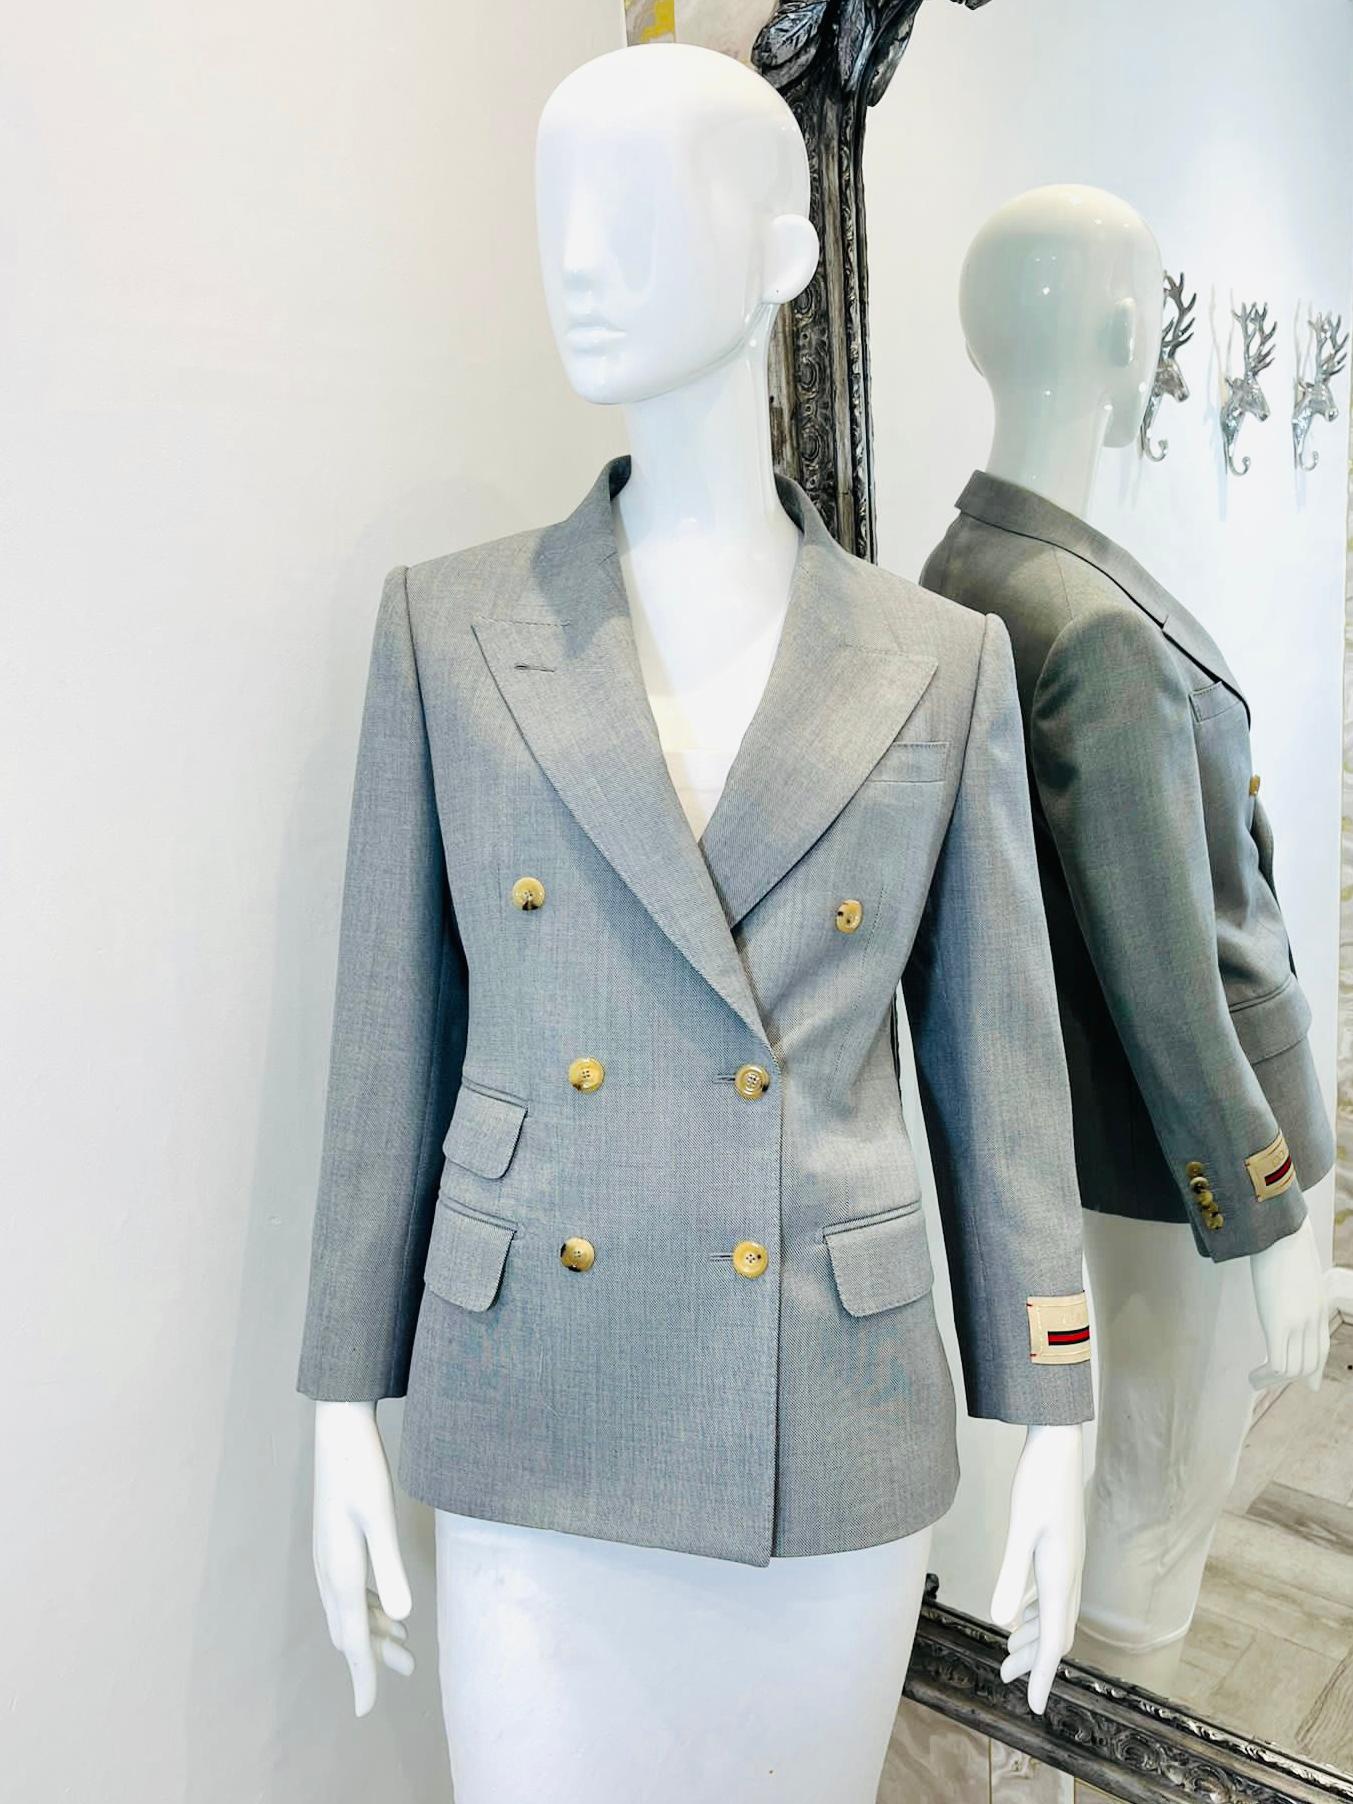 Gucci Wool Double Breasted Jacket

From the Aria collection is this two toned grey, sharkskin wool blazer with a vintage feel.

Oversized applique logo patch to one cuff. Flap pockets. Baby blue cotton lining.

Rrp £2,350.

Size - S

Condition -